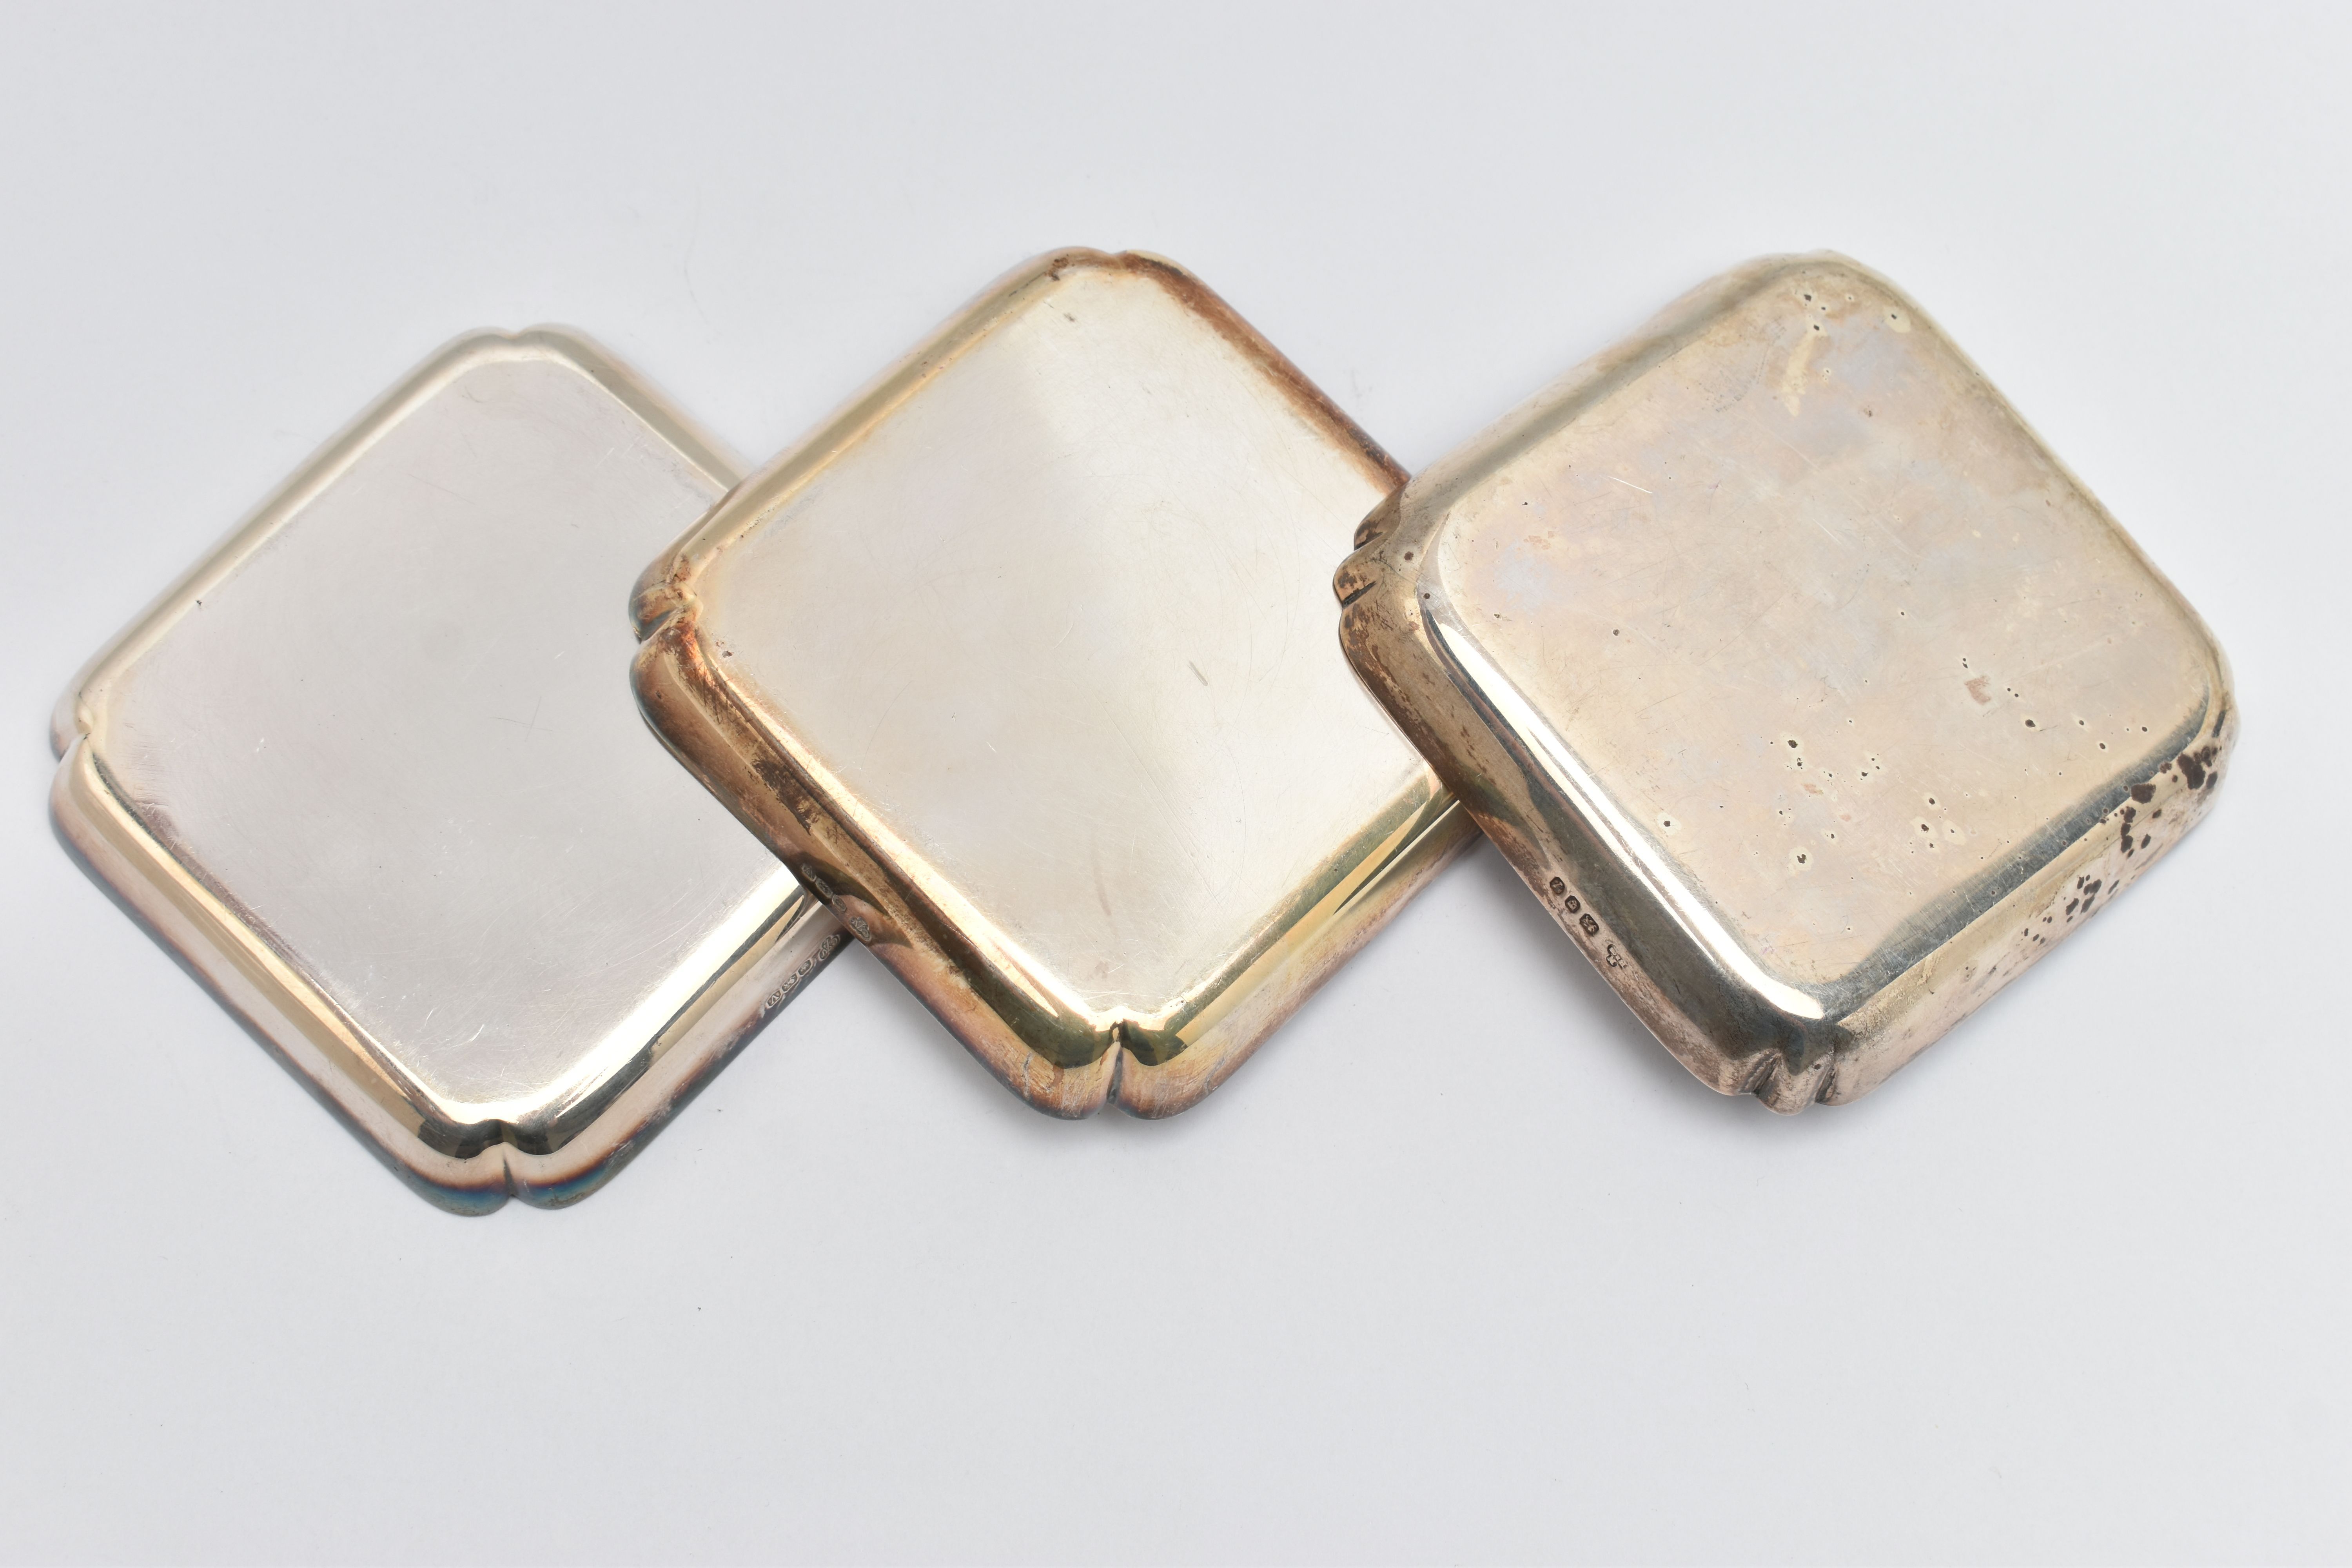 THREE SILVER PRESENTATION DISHES, each of a square form, personal engravings to each reading 'L.S. - Image 2 of 3